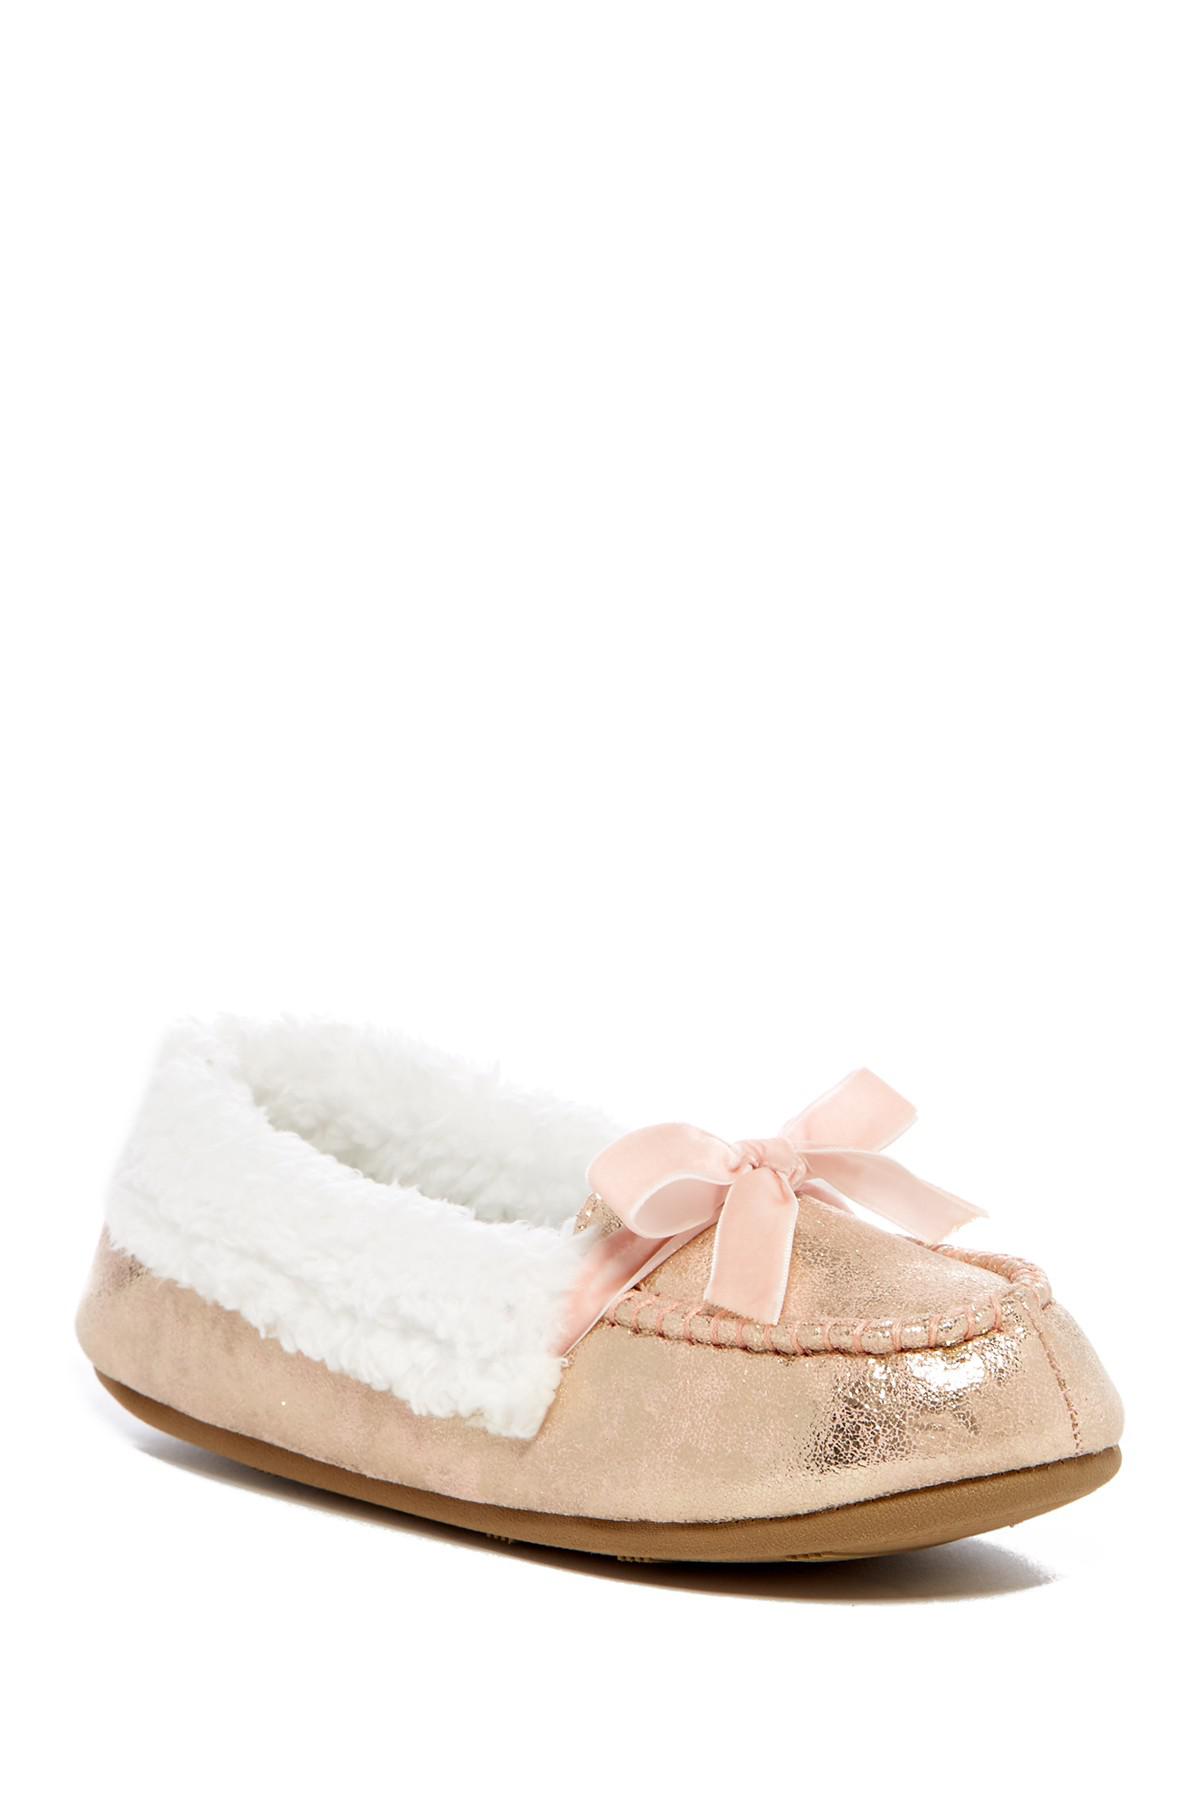 jessica simpson moccasin slippers